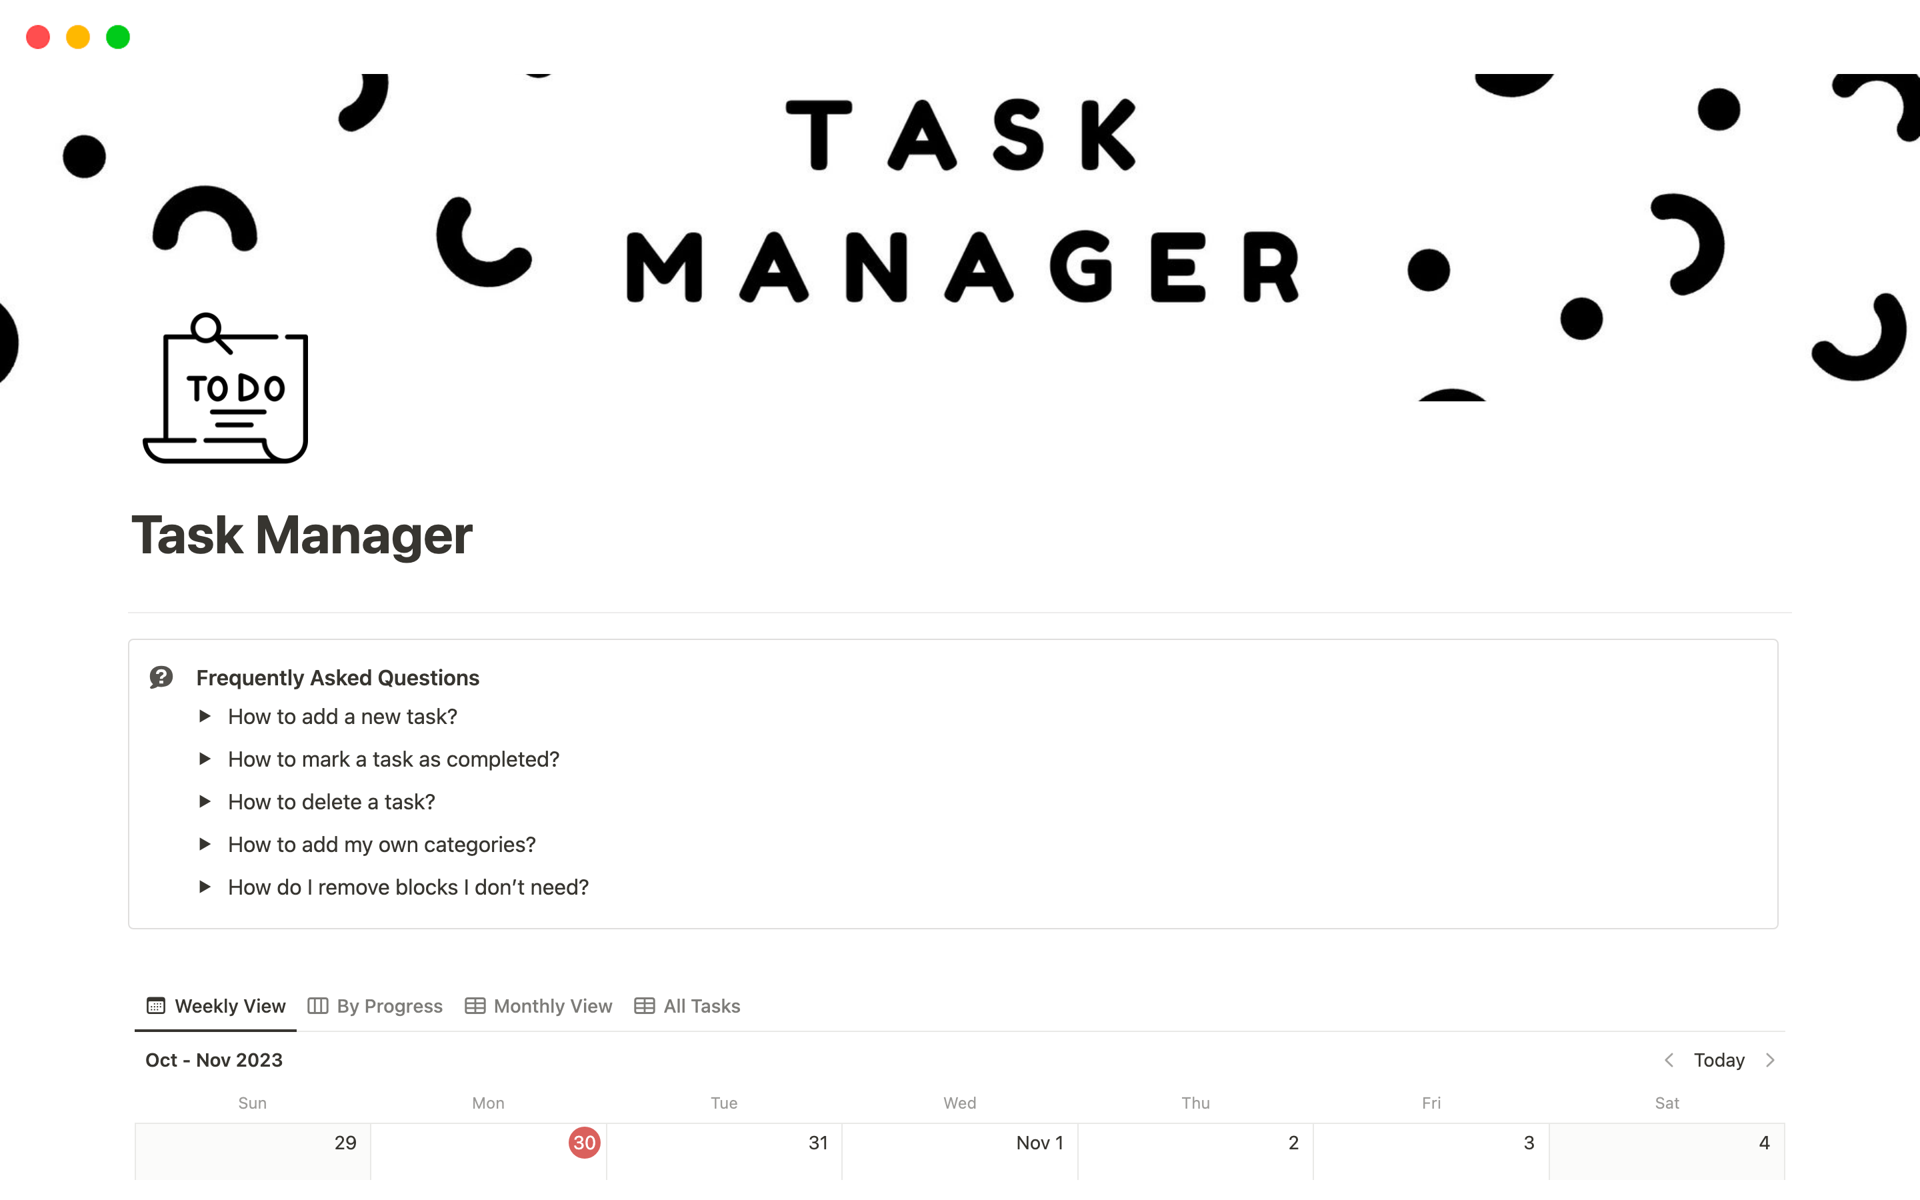 Keep your tasks organized and prioritize what matters most